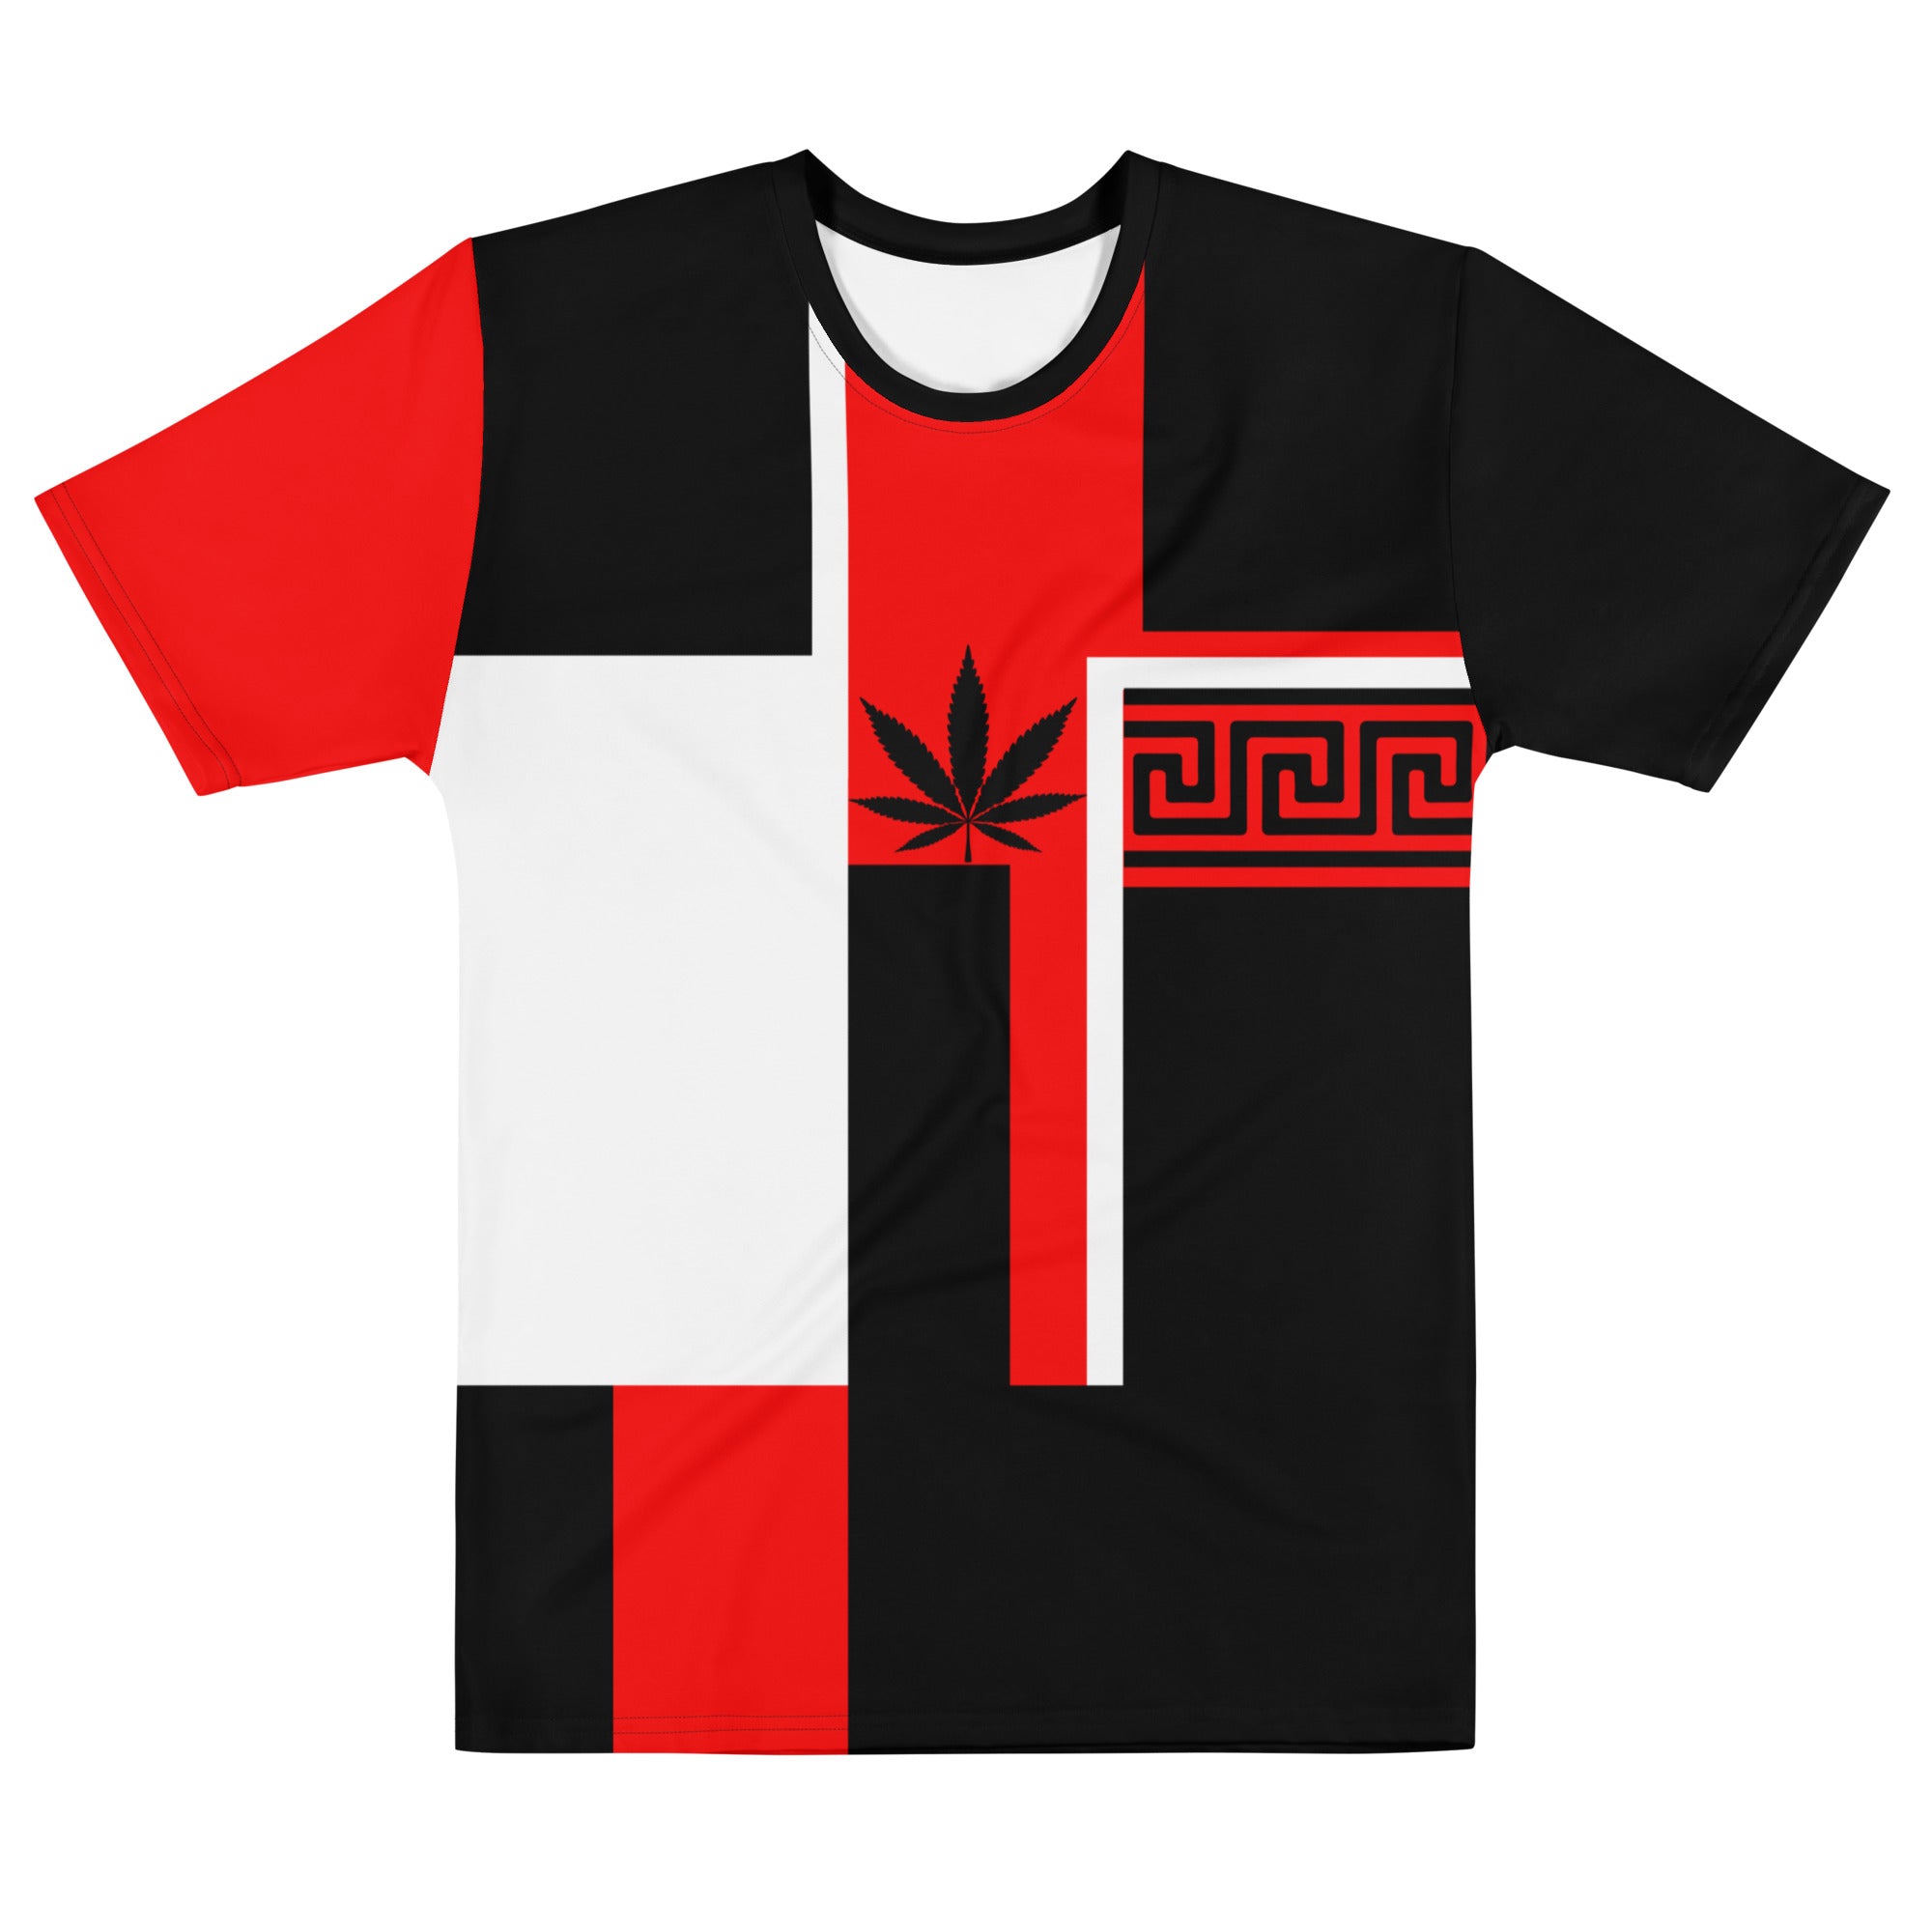 black and red graphic tee